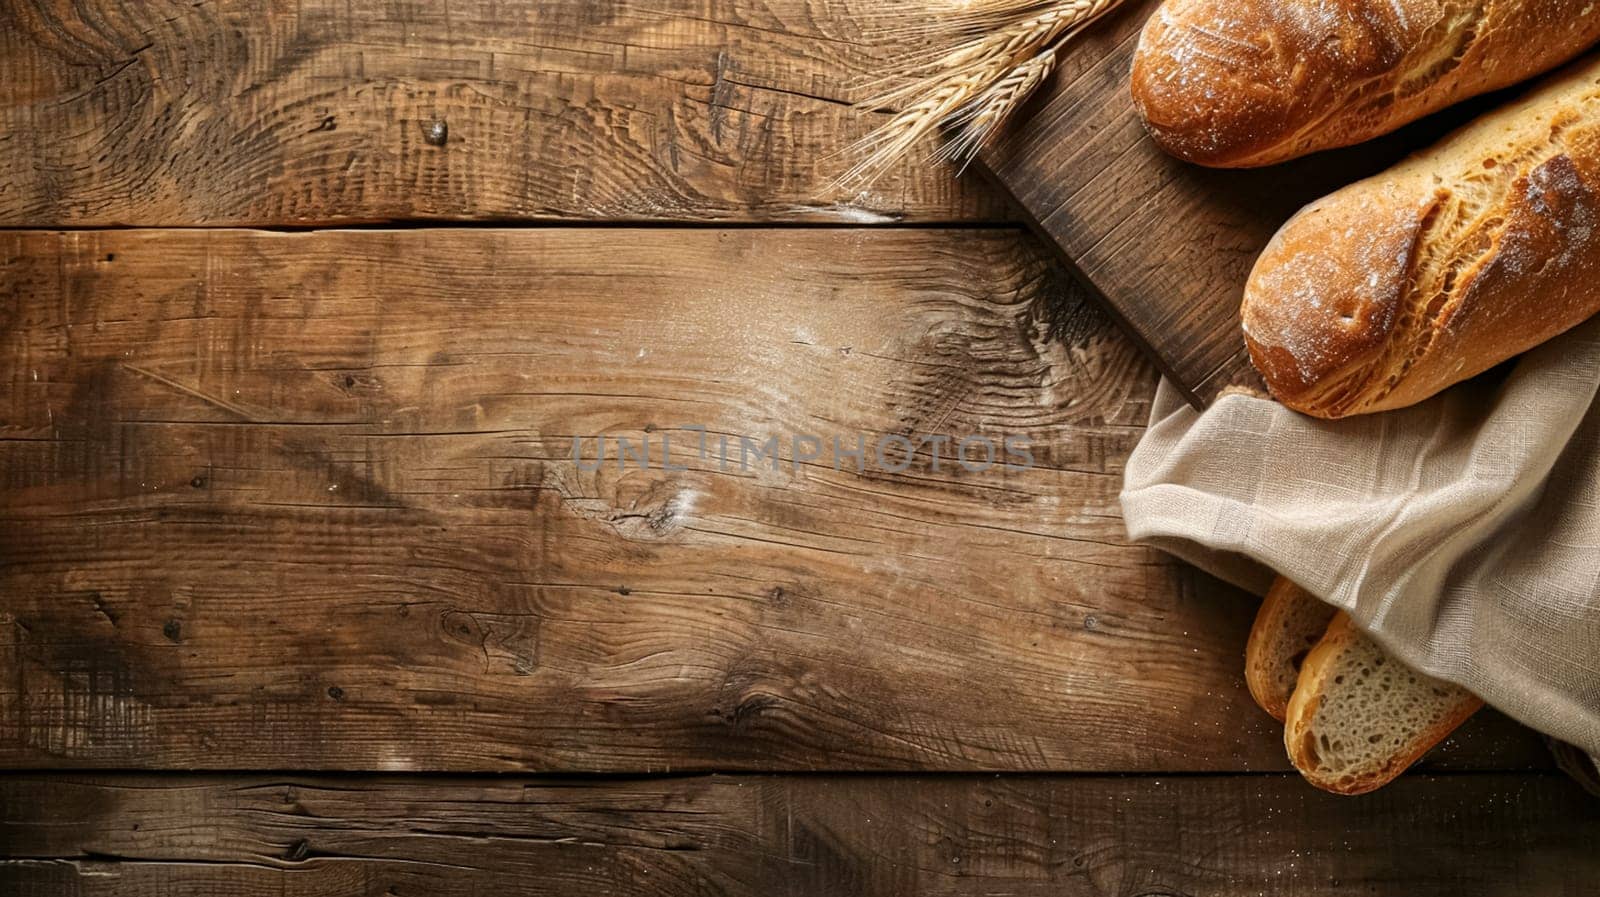 Bakery with freshly baked bread, variety of bread loaves, rolls, and baguettes displayed in baskets and on wooden shelves in the English countryside village